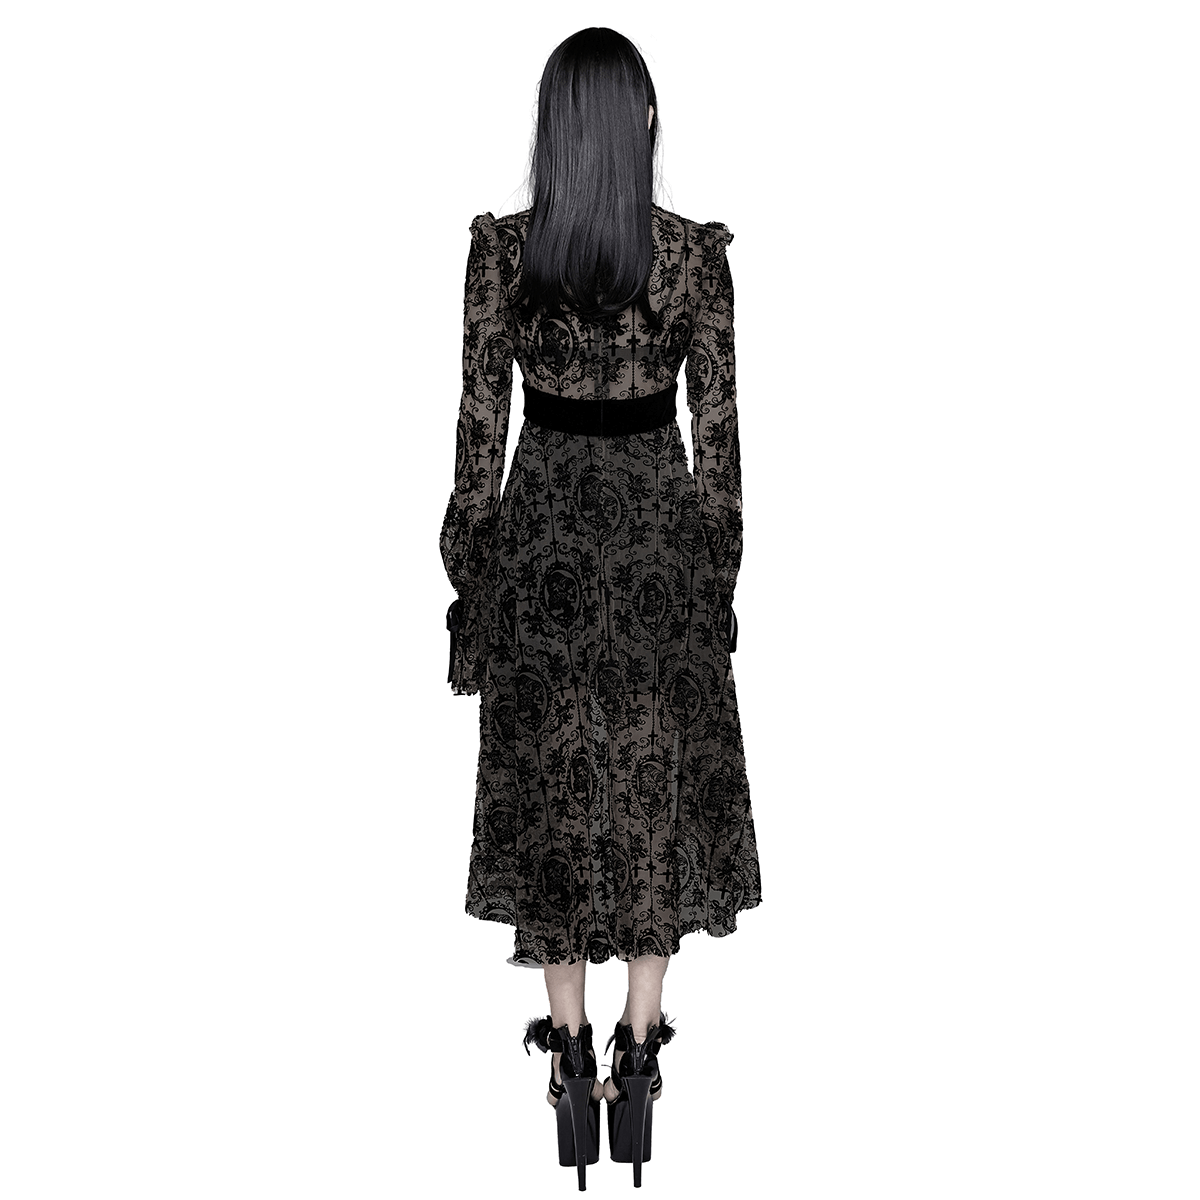 Sexy Irregular Lace Dress / Women's Elastic Dress With Long Sleeves in Gothic Style - HARD'N'HEAVY